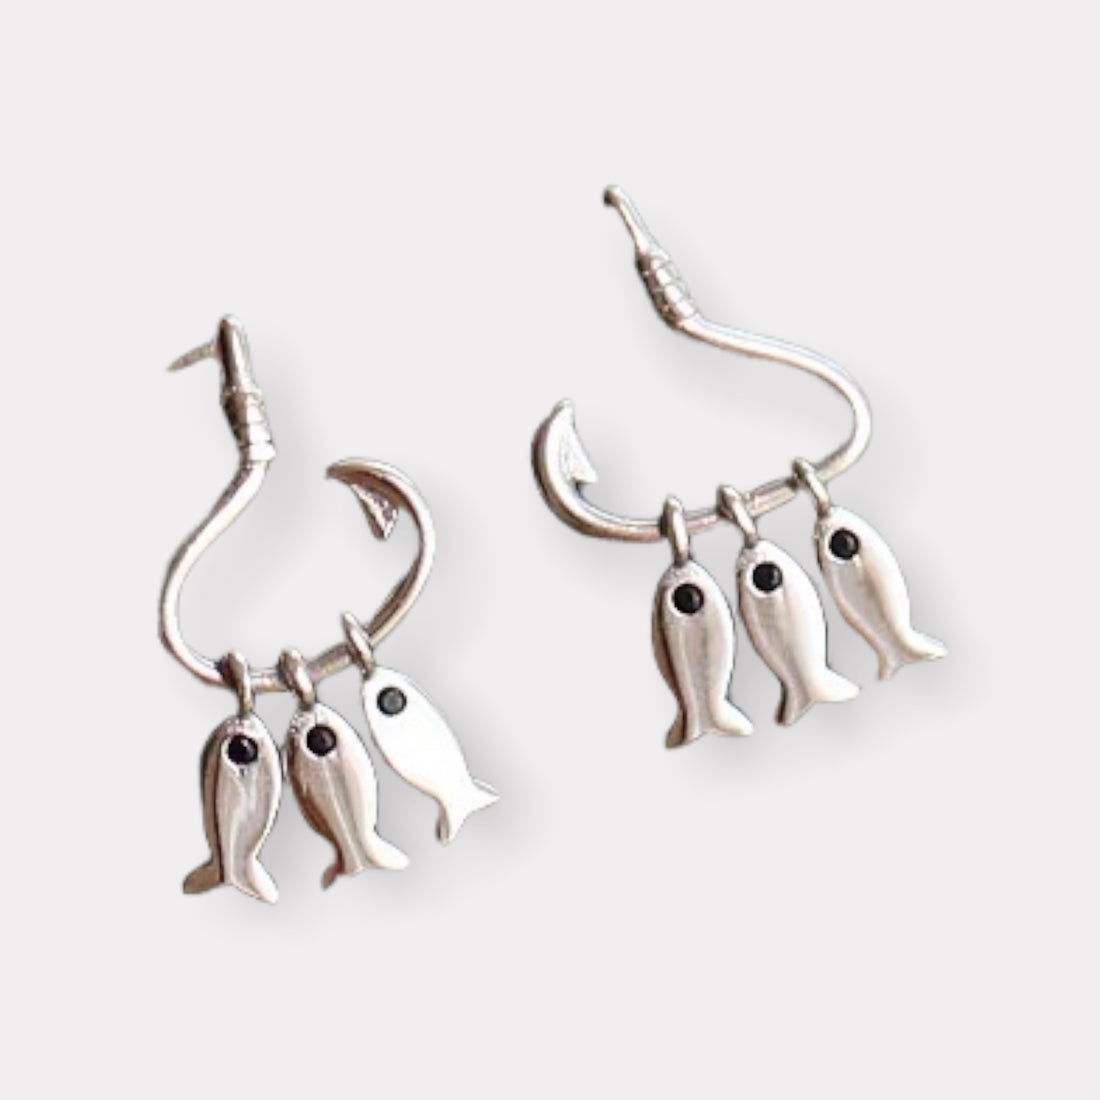 Unique 3 little fish Dangle charms on hook earrings – Chili